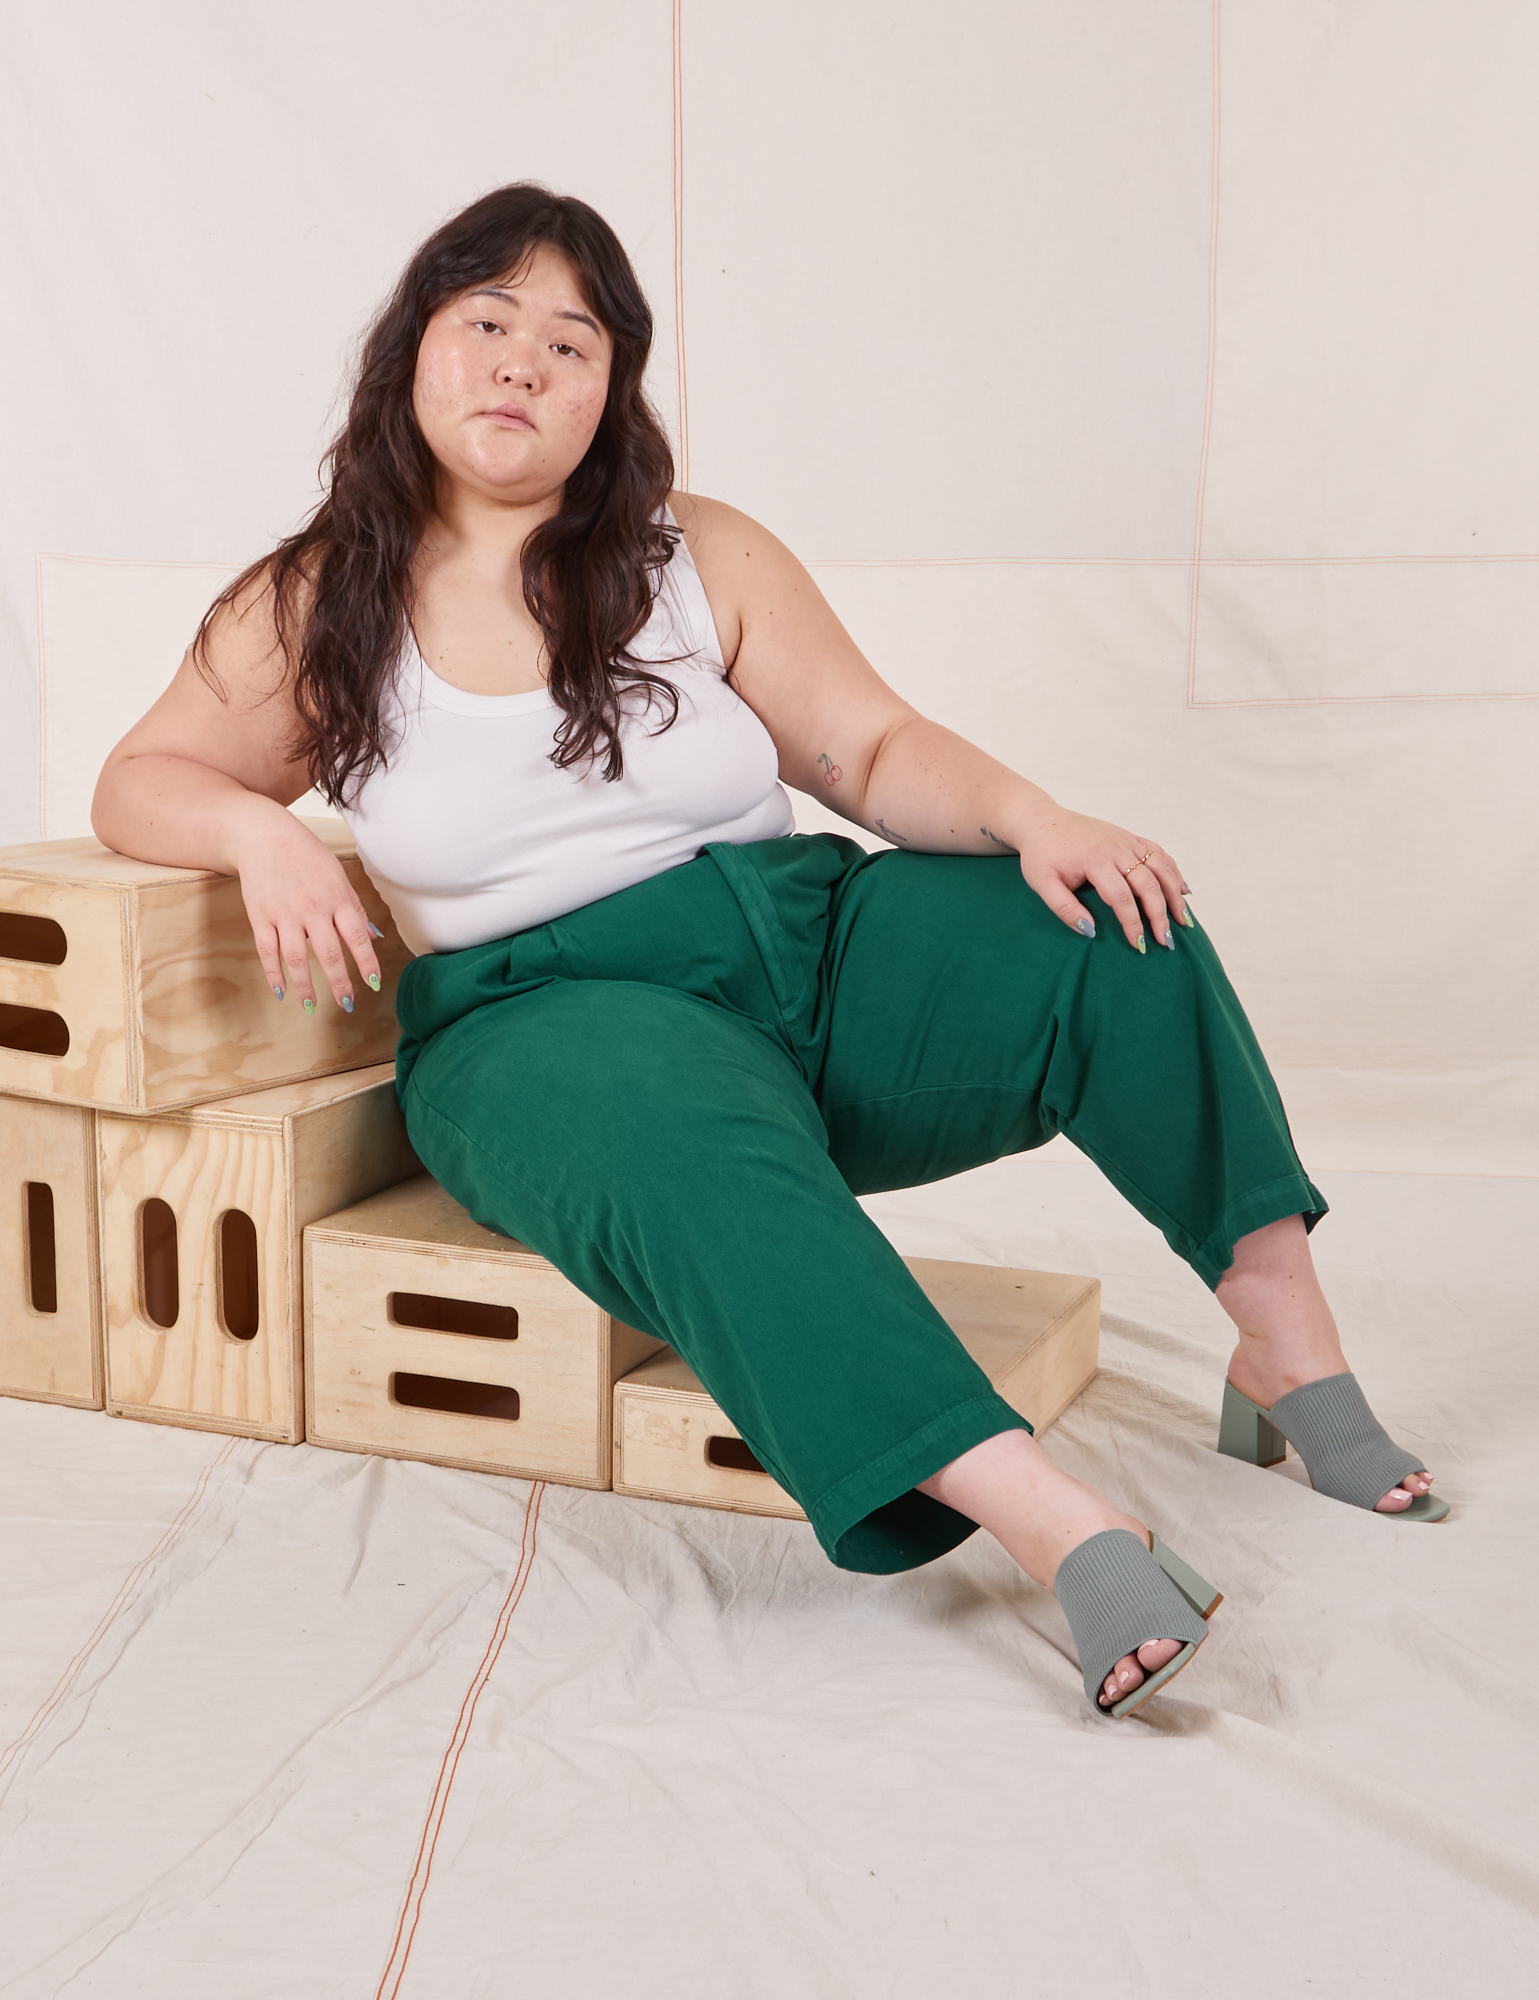 Ashley is wearing Heavyweight Trousers in Hunter Green and Cropped Tank Top in vintage tee off-white